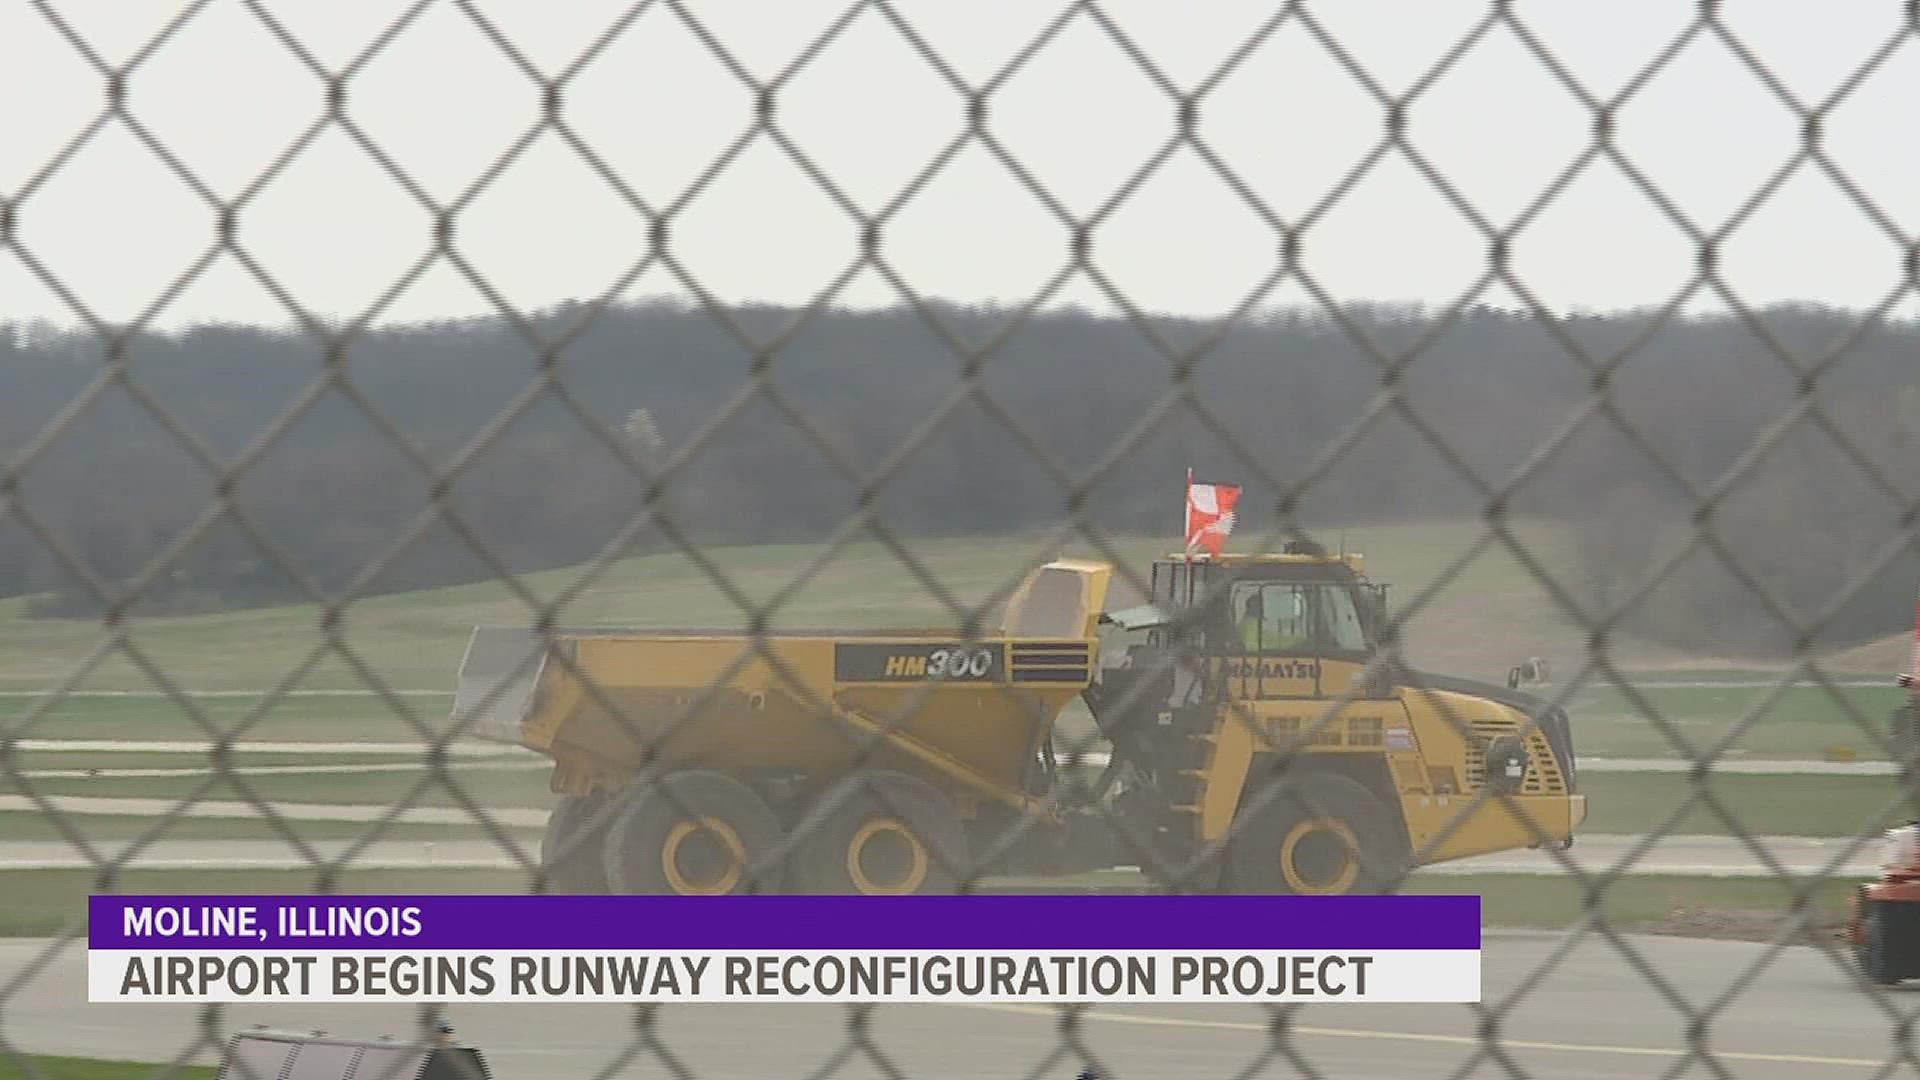 The airport will remove the "bullseye" configuration of its airfield and build a new taxiway to make its runways safer and more efficient.